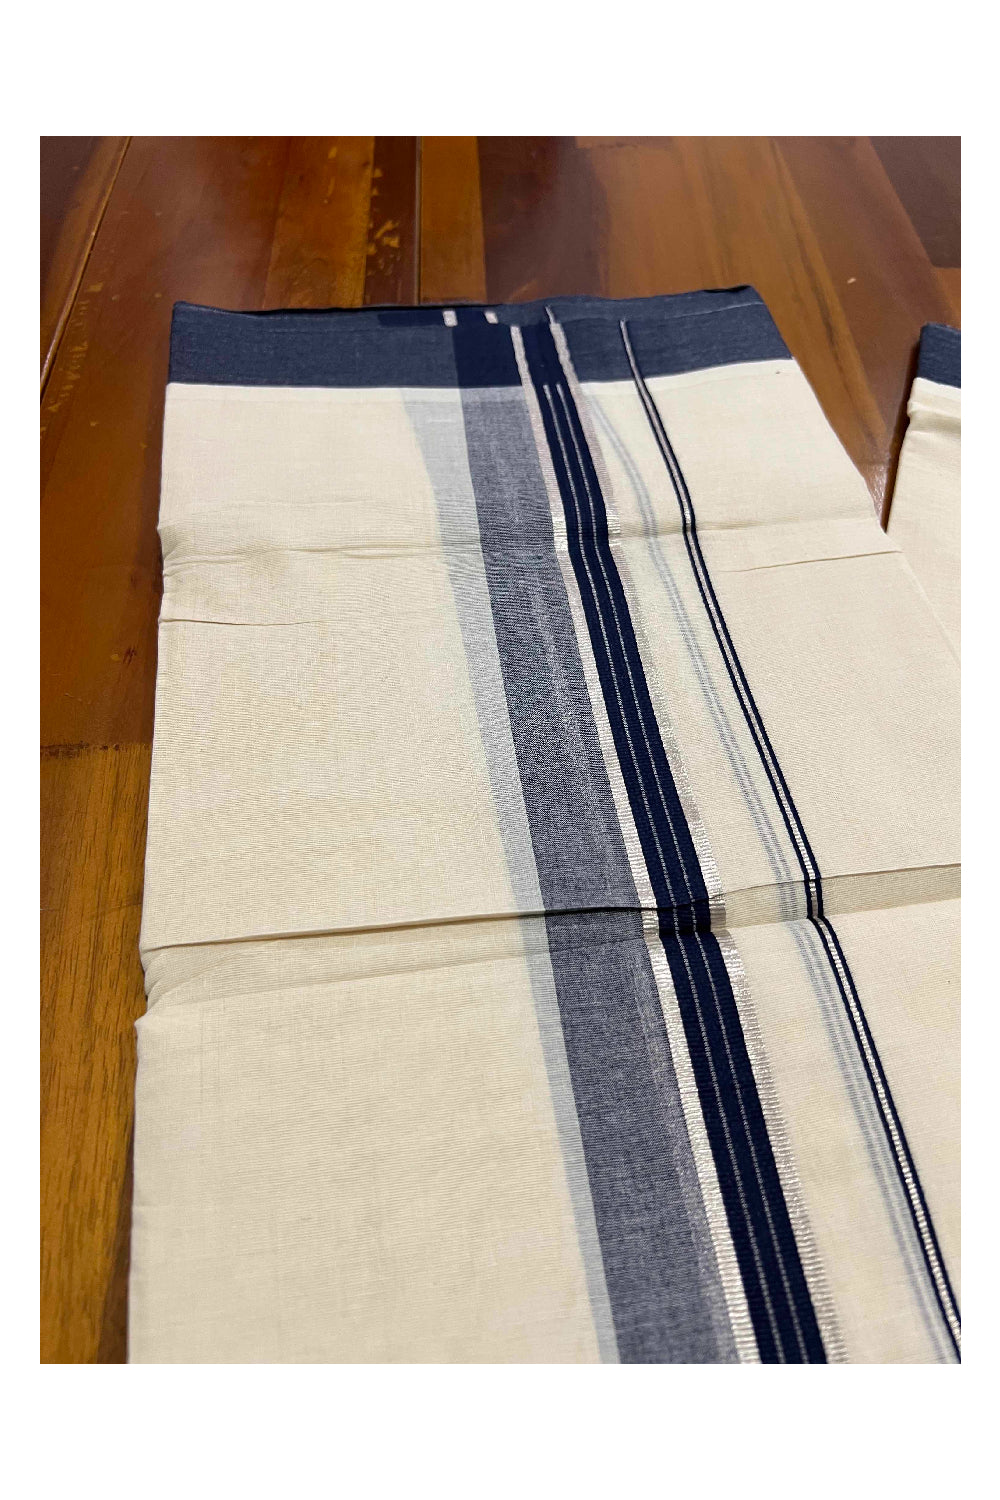 Off White Kerala Double Mundu with Silver Kasavu and Navy Blue Border (South Indian Dhoti)